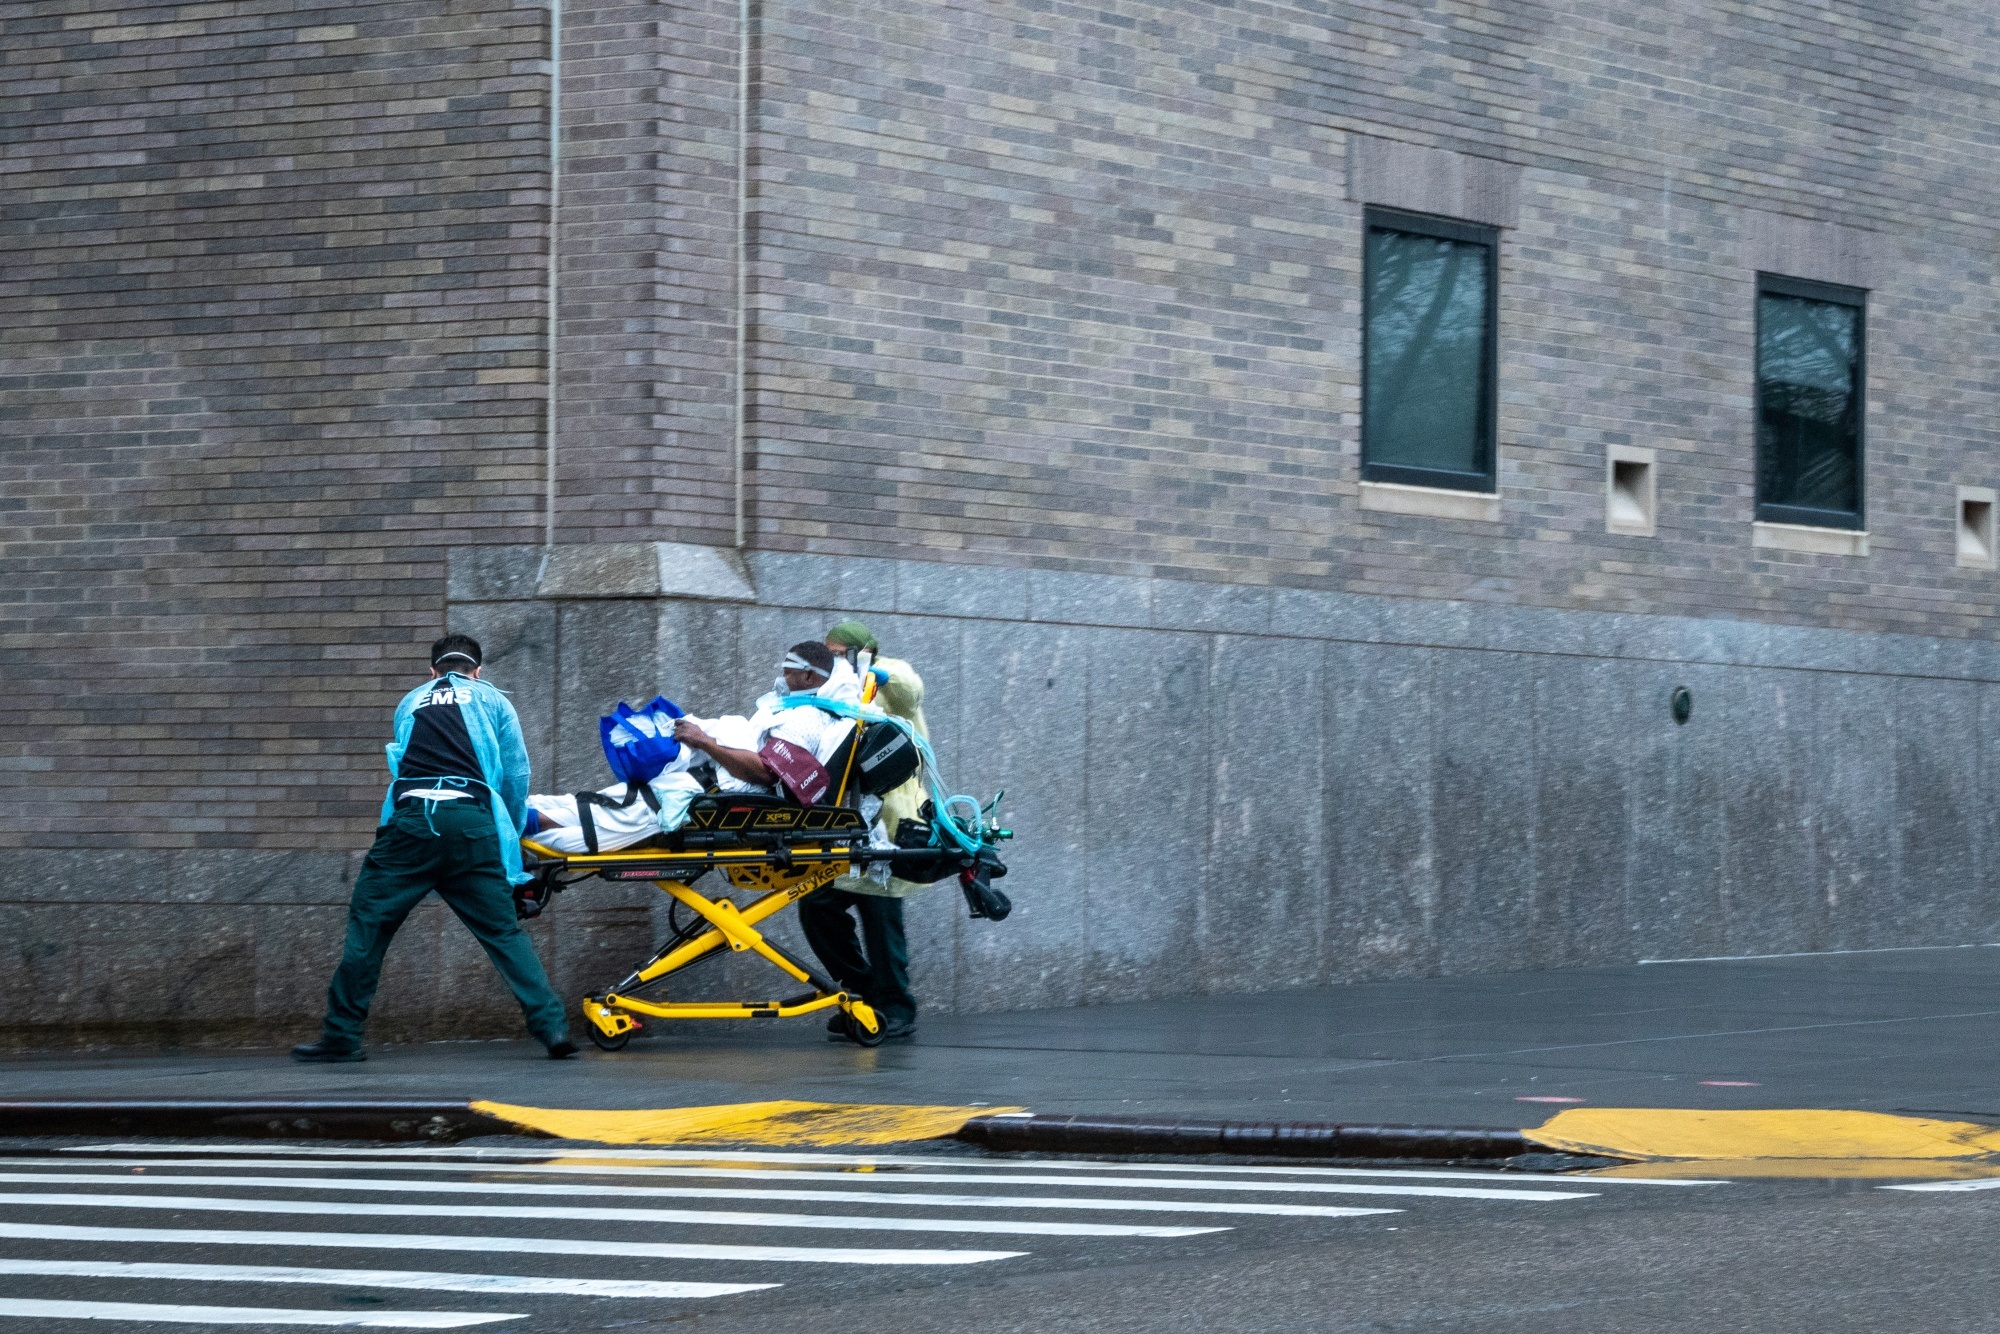 Medical staff transport a patient on the side walk outside of Mount Sinai hospital in New York on April 13